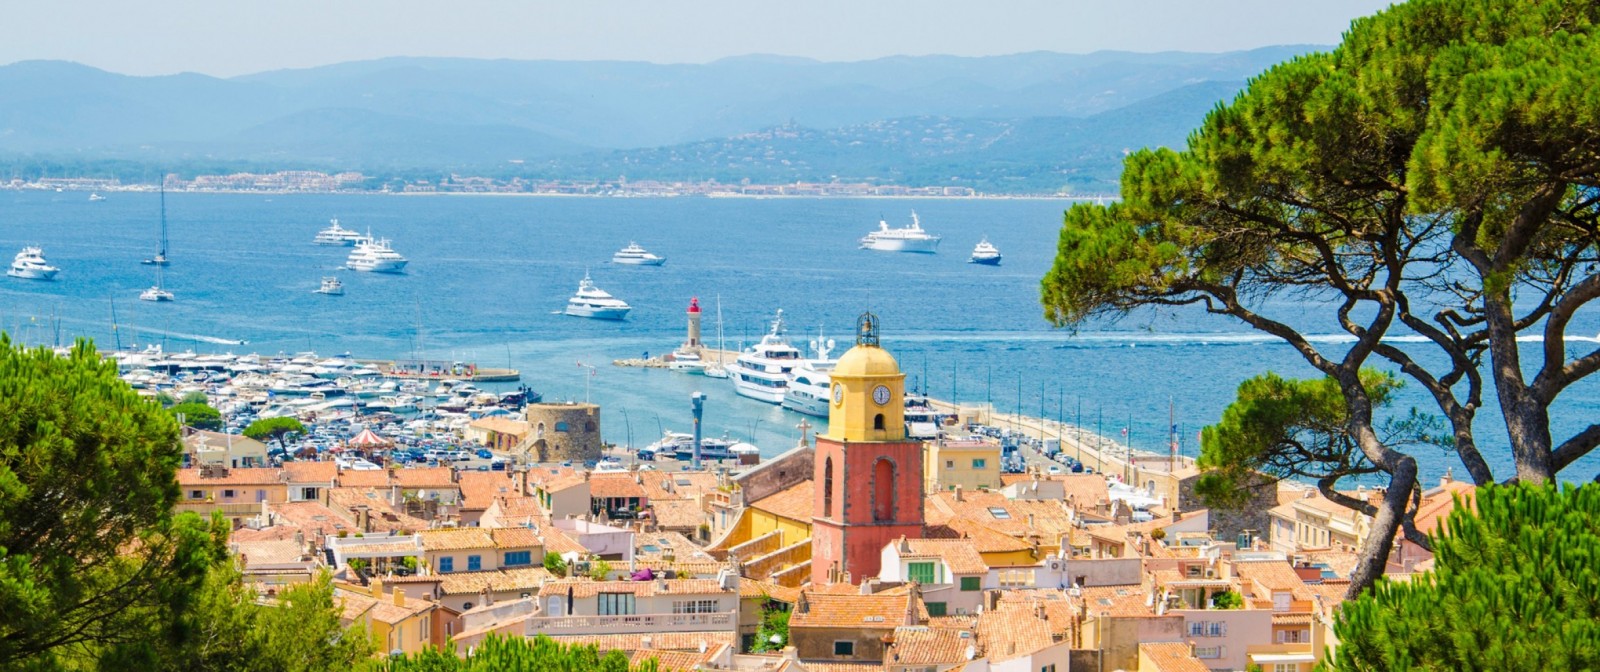 Private Chauffeur for MIPCOM Event in Cannes - Premium Vehicles & Services - Reactivity 24/7 - Ruby Services - Car Rental with Driver for MIPCOM Event in Cannes - MIPCOM